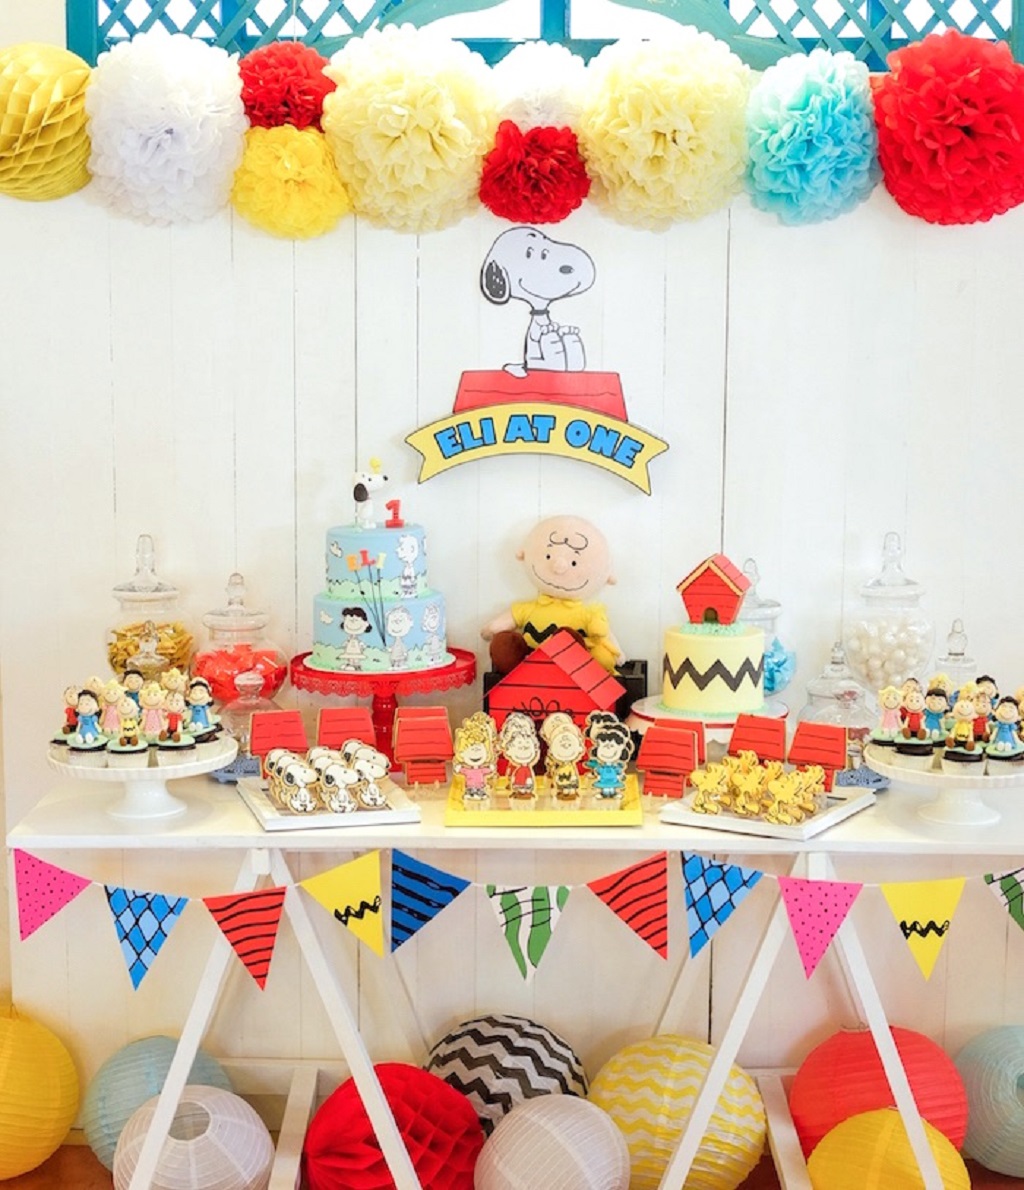 Fun Snoopy Party Favors and Activities